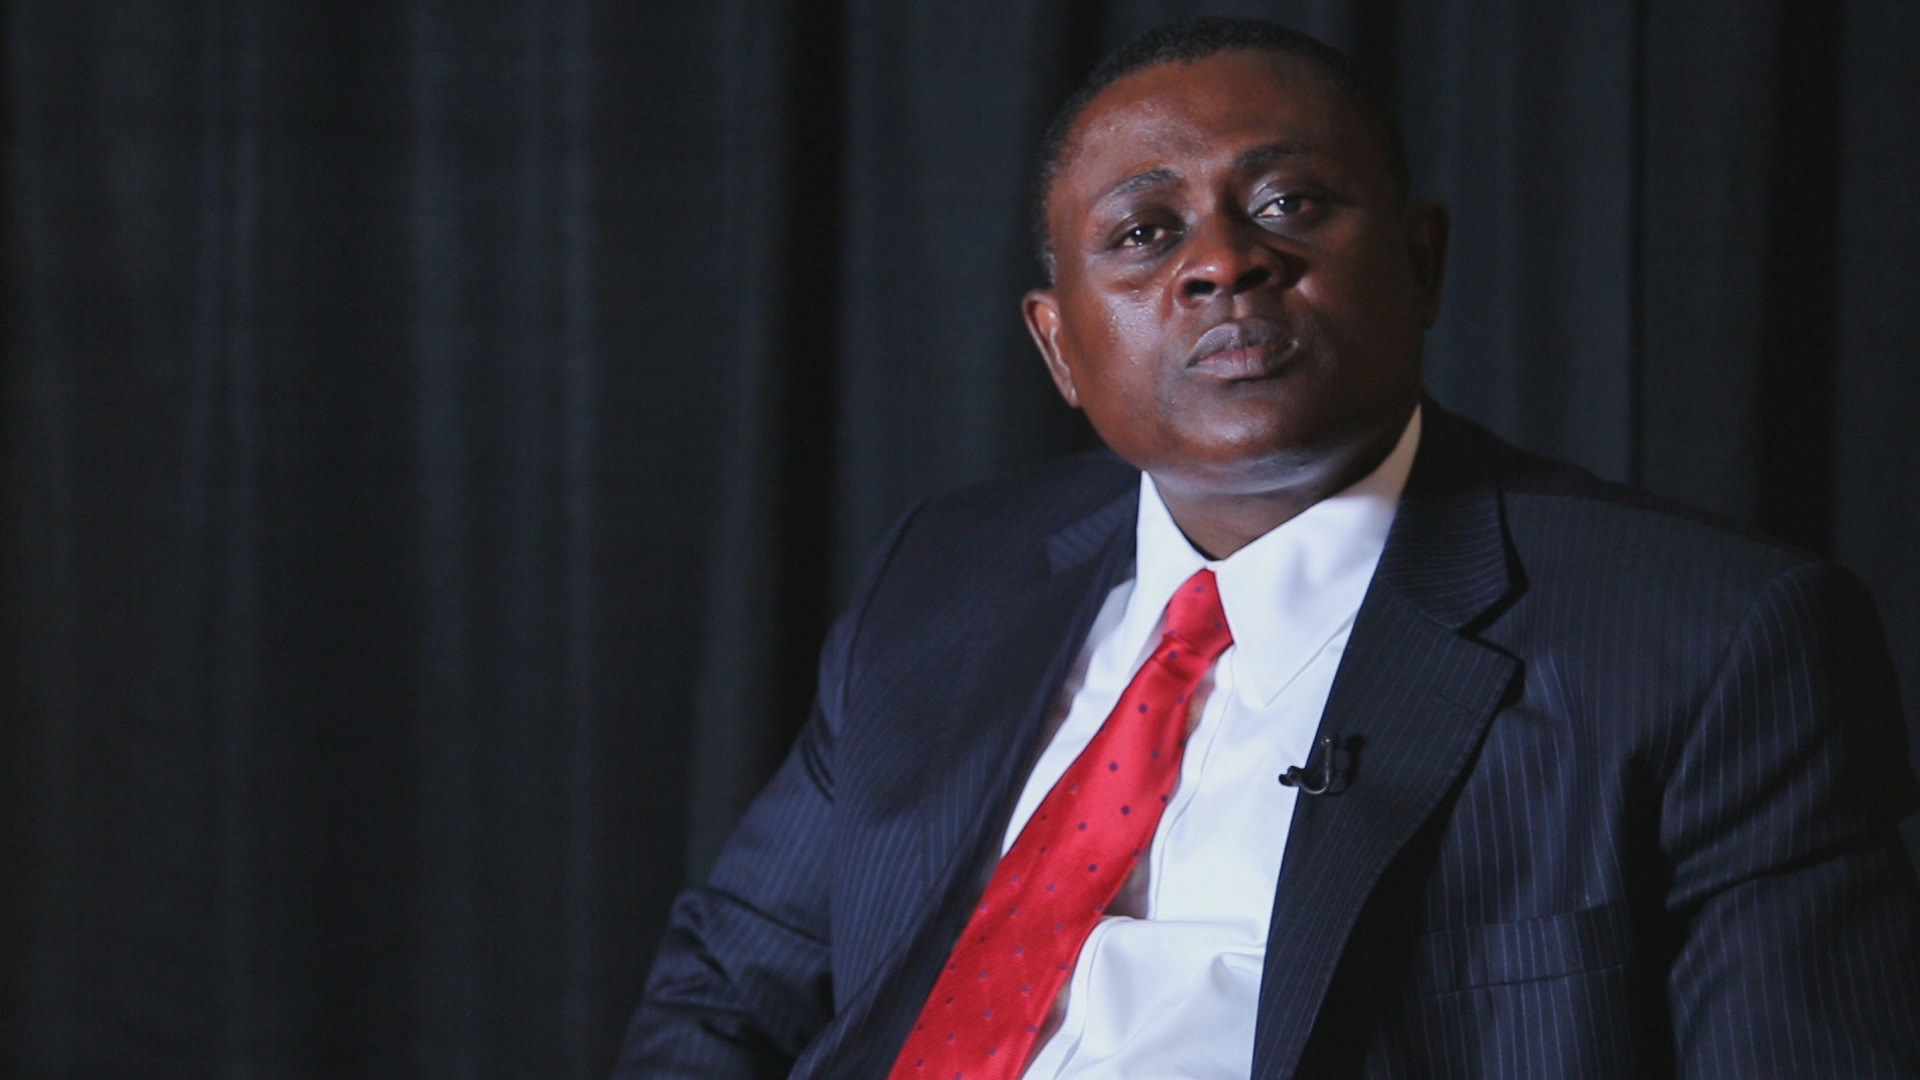  Dr. Bennet Omalu, a forensic pathologist who examined the brains of several deceased NFL players and was the first to publish findings of Chronic Traumatic Encephalopathy in American football players (May 2013) 